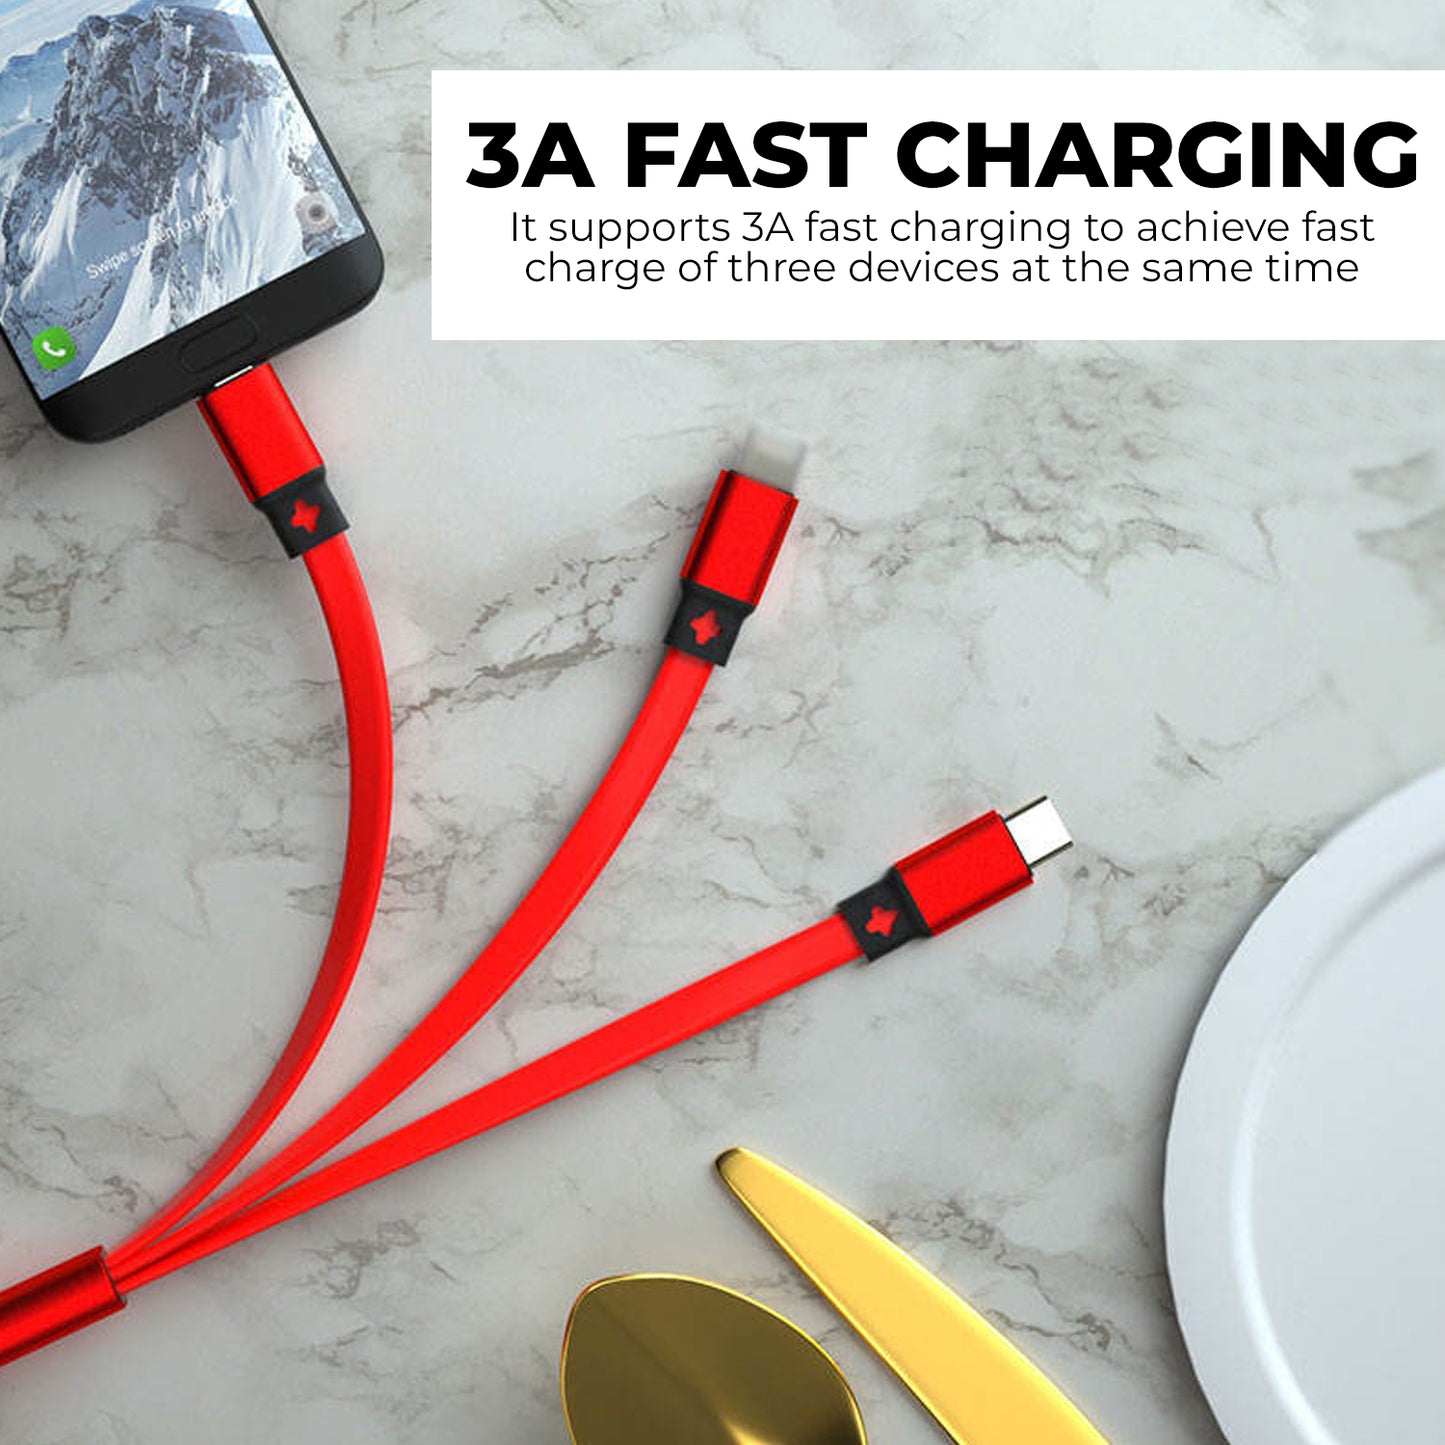 WRADER Micro USB Cable 3 A 1 m 3 in1 Fast Charging Data Cable for All Smartphones and iOS Data Cable  (Compatible with Micro USB Smartphones, USB-C Smartphones, iOS Phones, Black, One Cable)